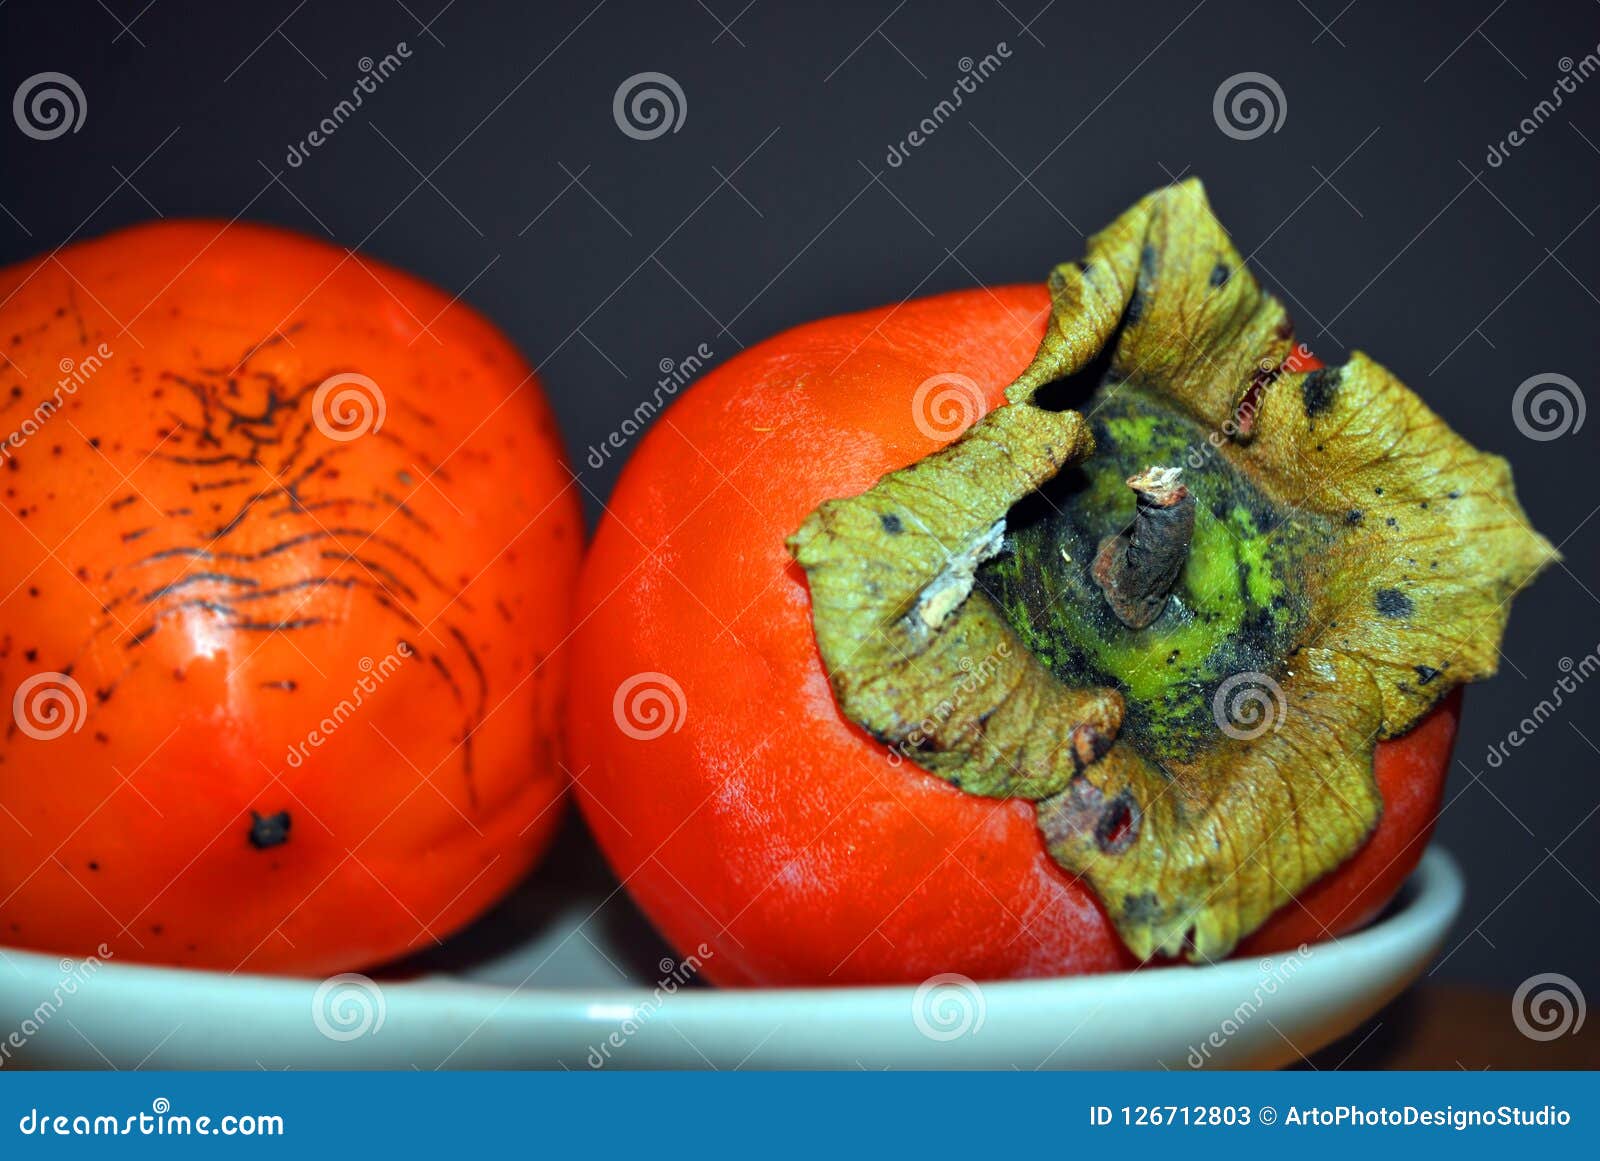 couple of ripe persimons macro detail in white plate on dark background